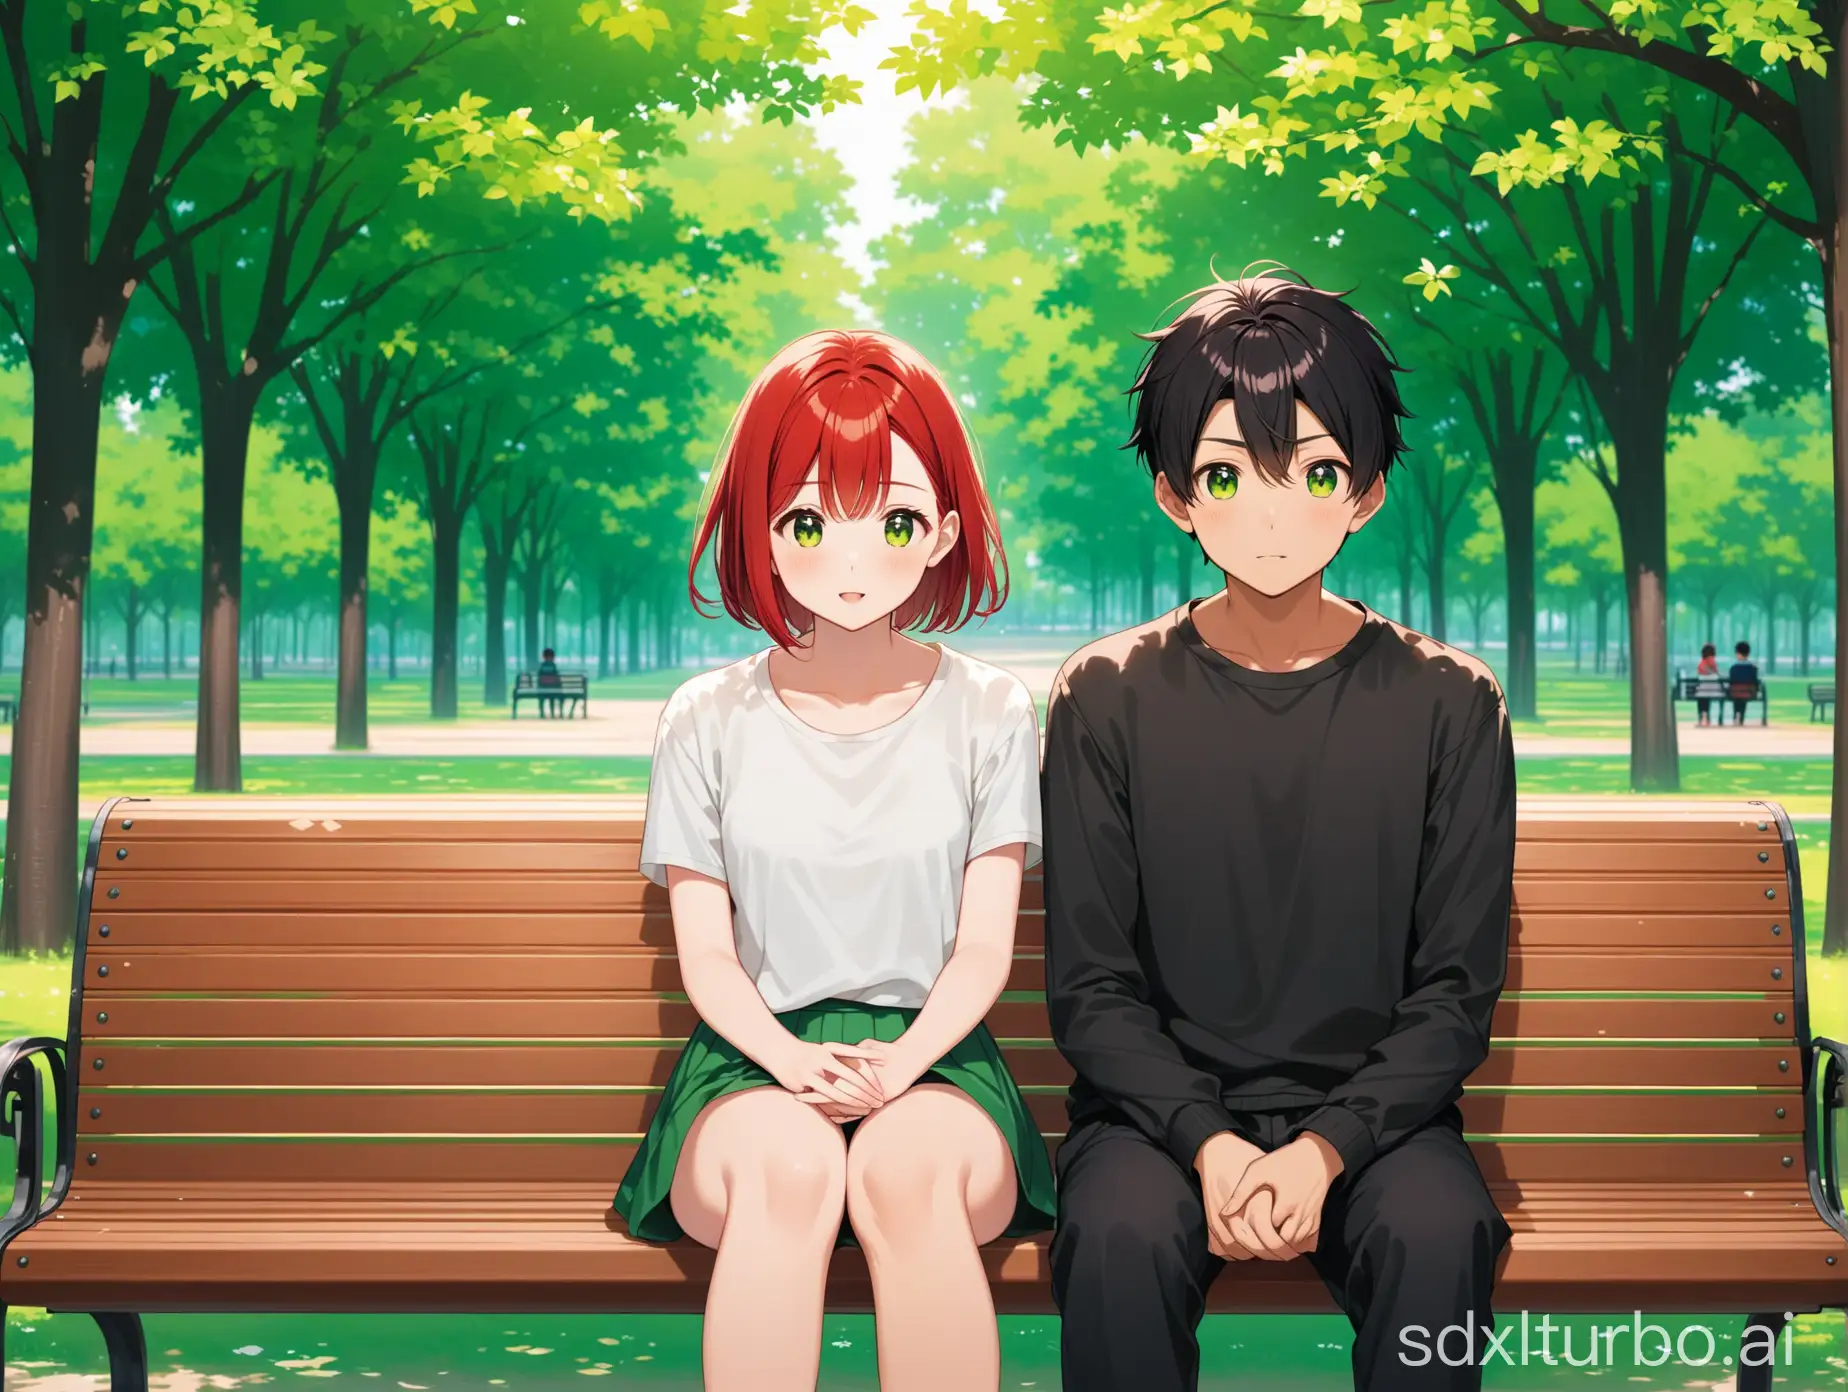 RedHaired-Boy-and-Black-ShortHaired-Girl-Sitting-on-Park-Bench-Amidst-Verdant-Trees